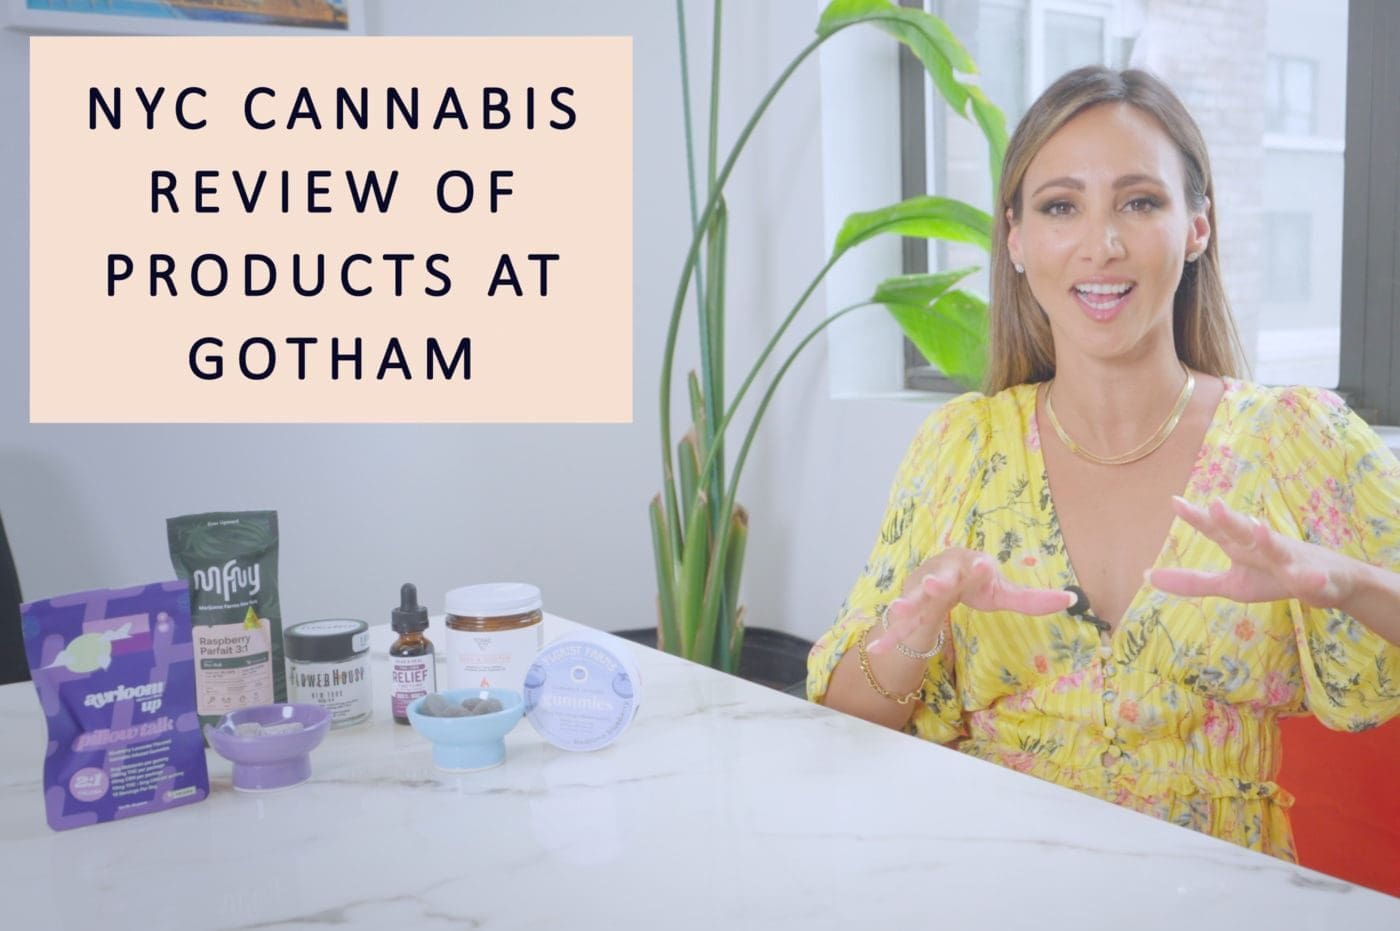 You won't find more high culture cannabis than at Gotham in NYC